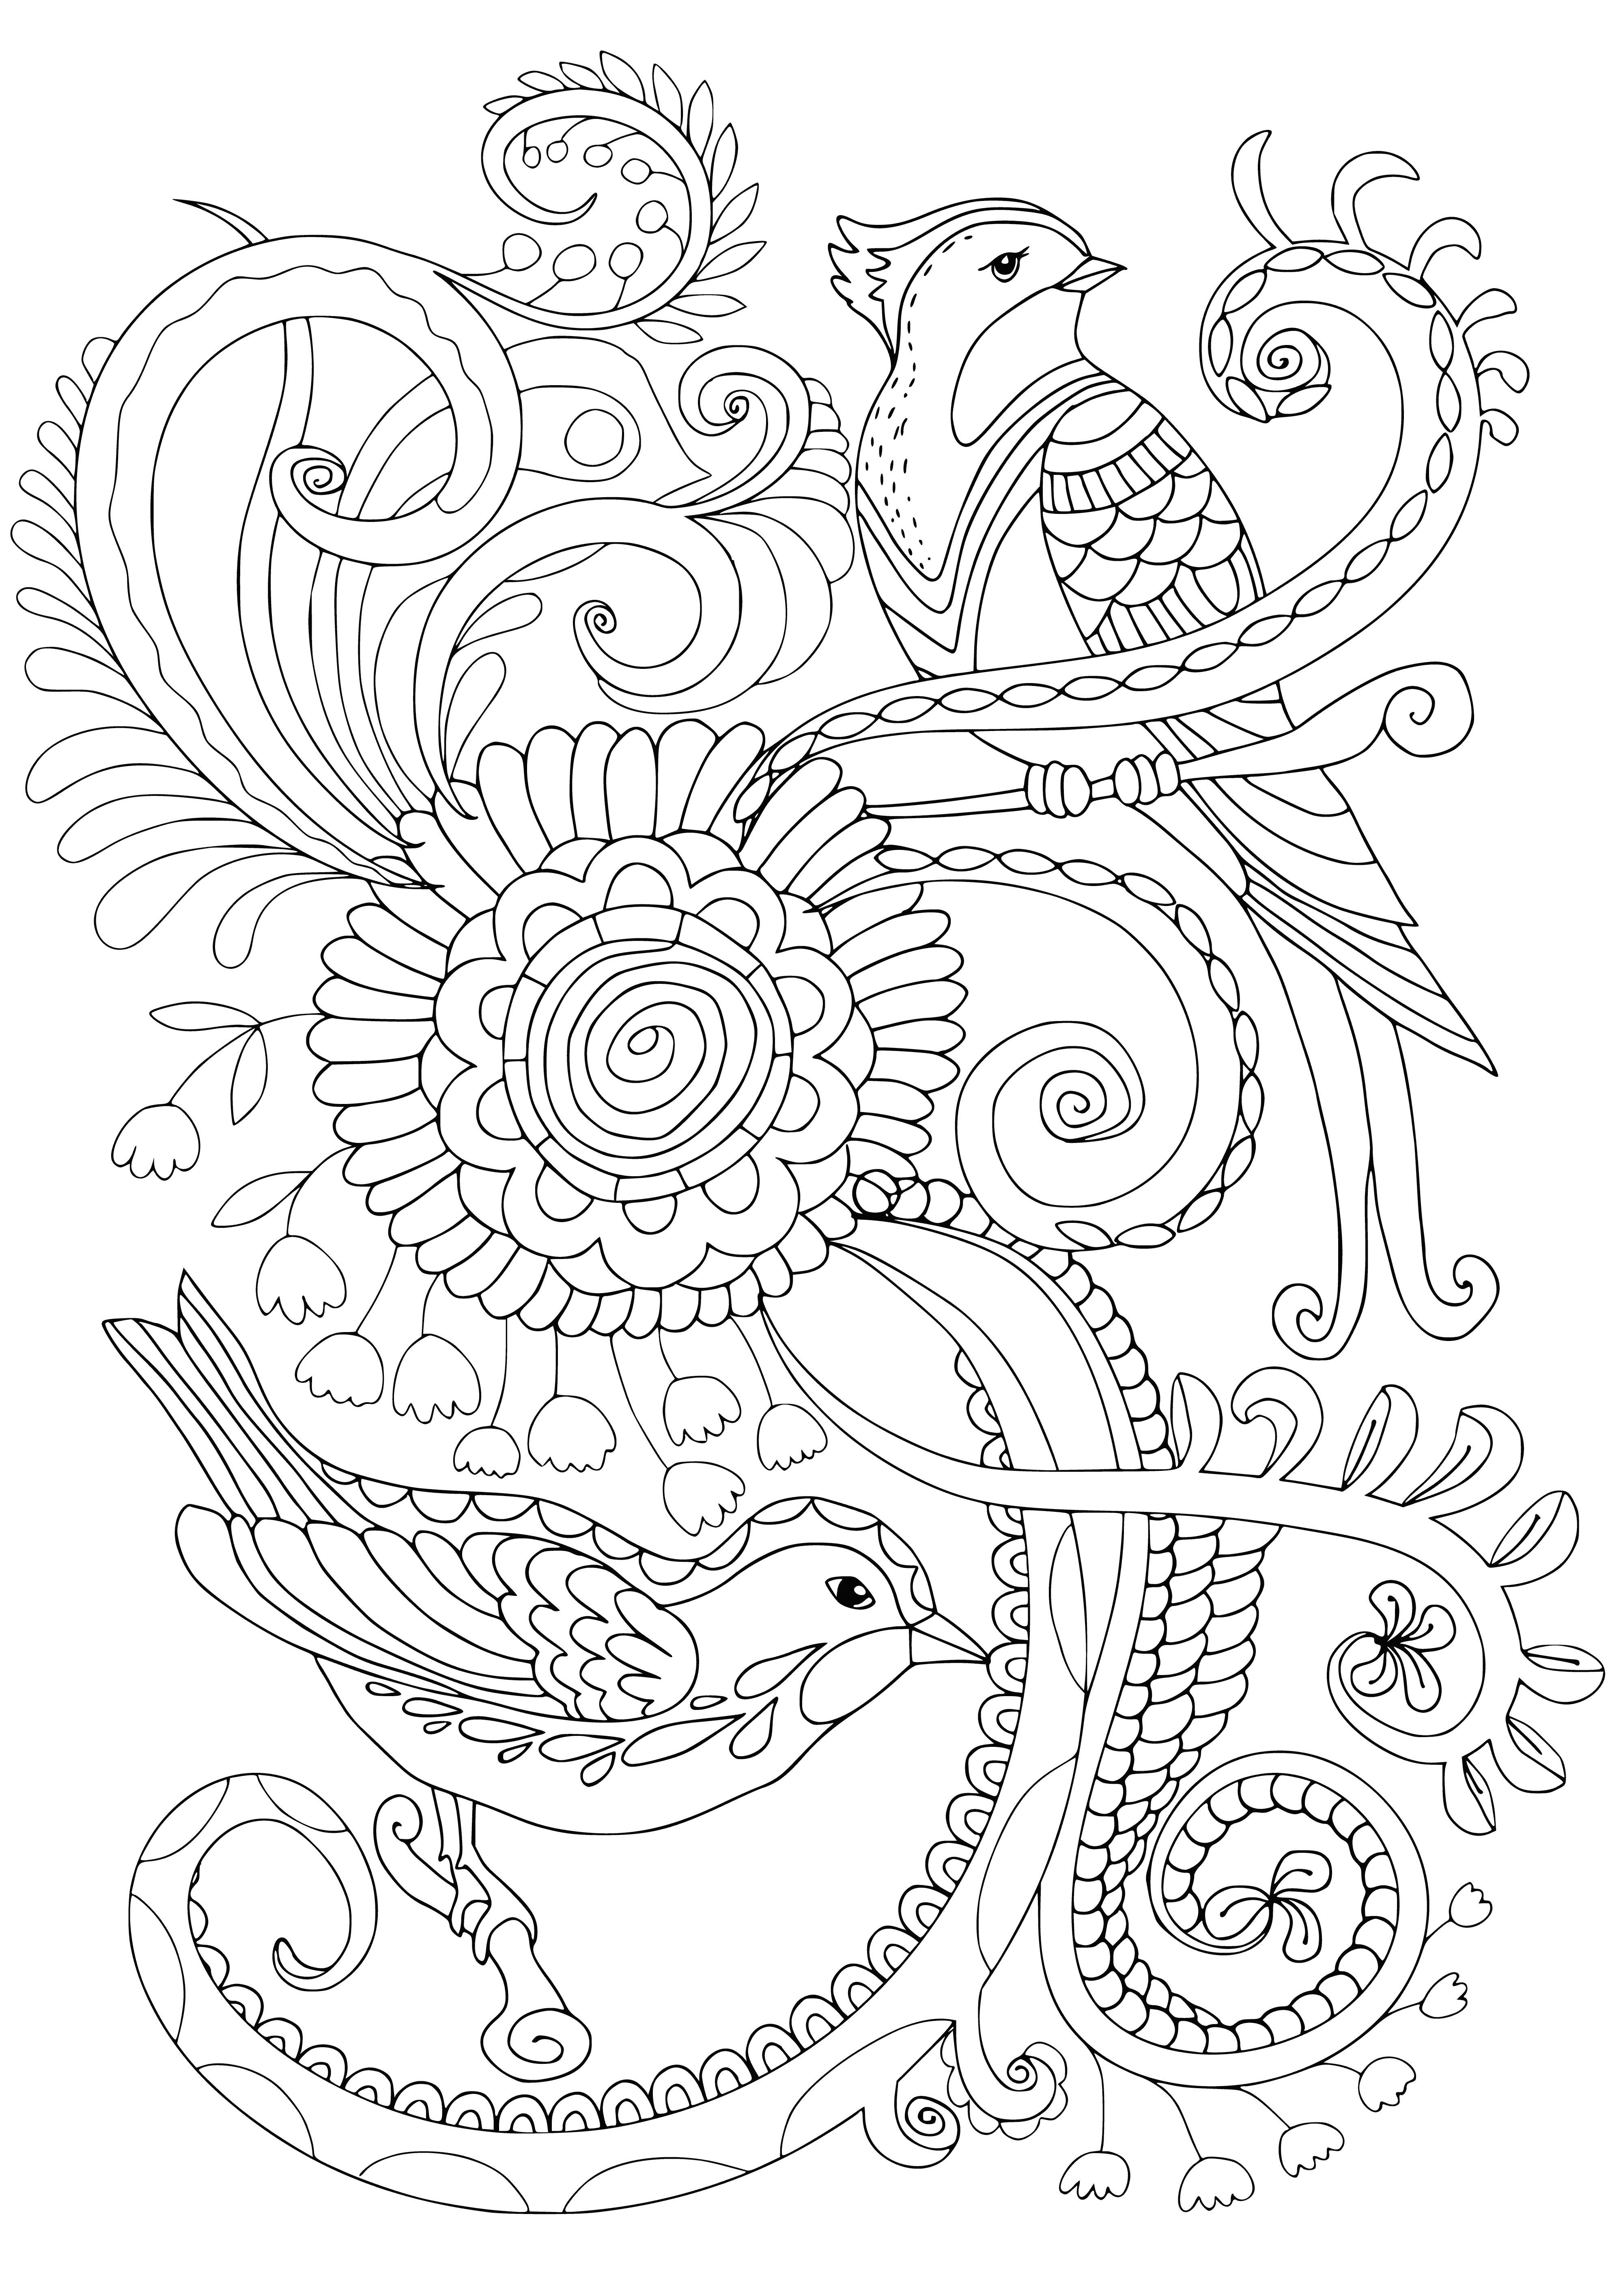 Birds on a branch coloring page